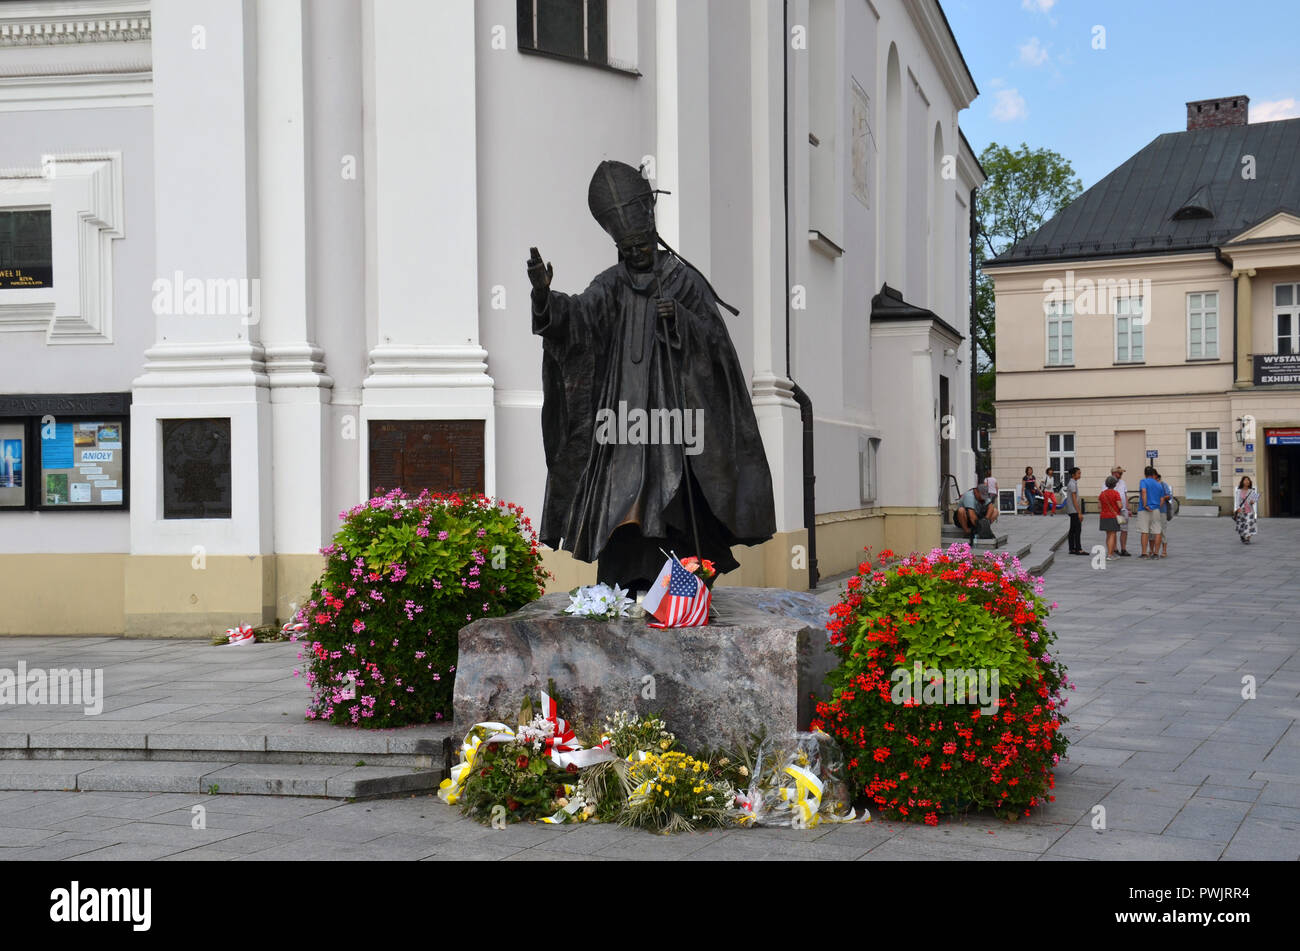 Wadowice, Poland - August 9, 2018: Statue of Pope John Paul the 2nd in city where he was born. Stock Photo